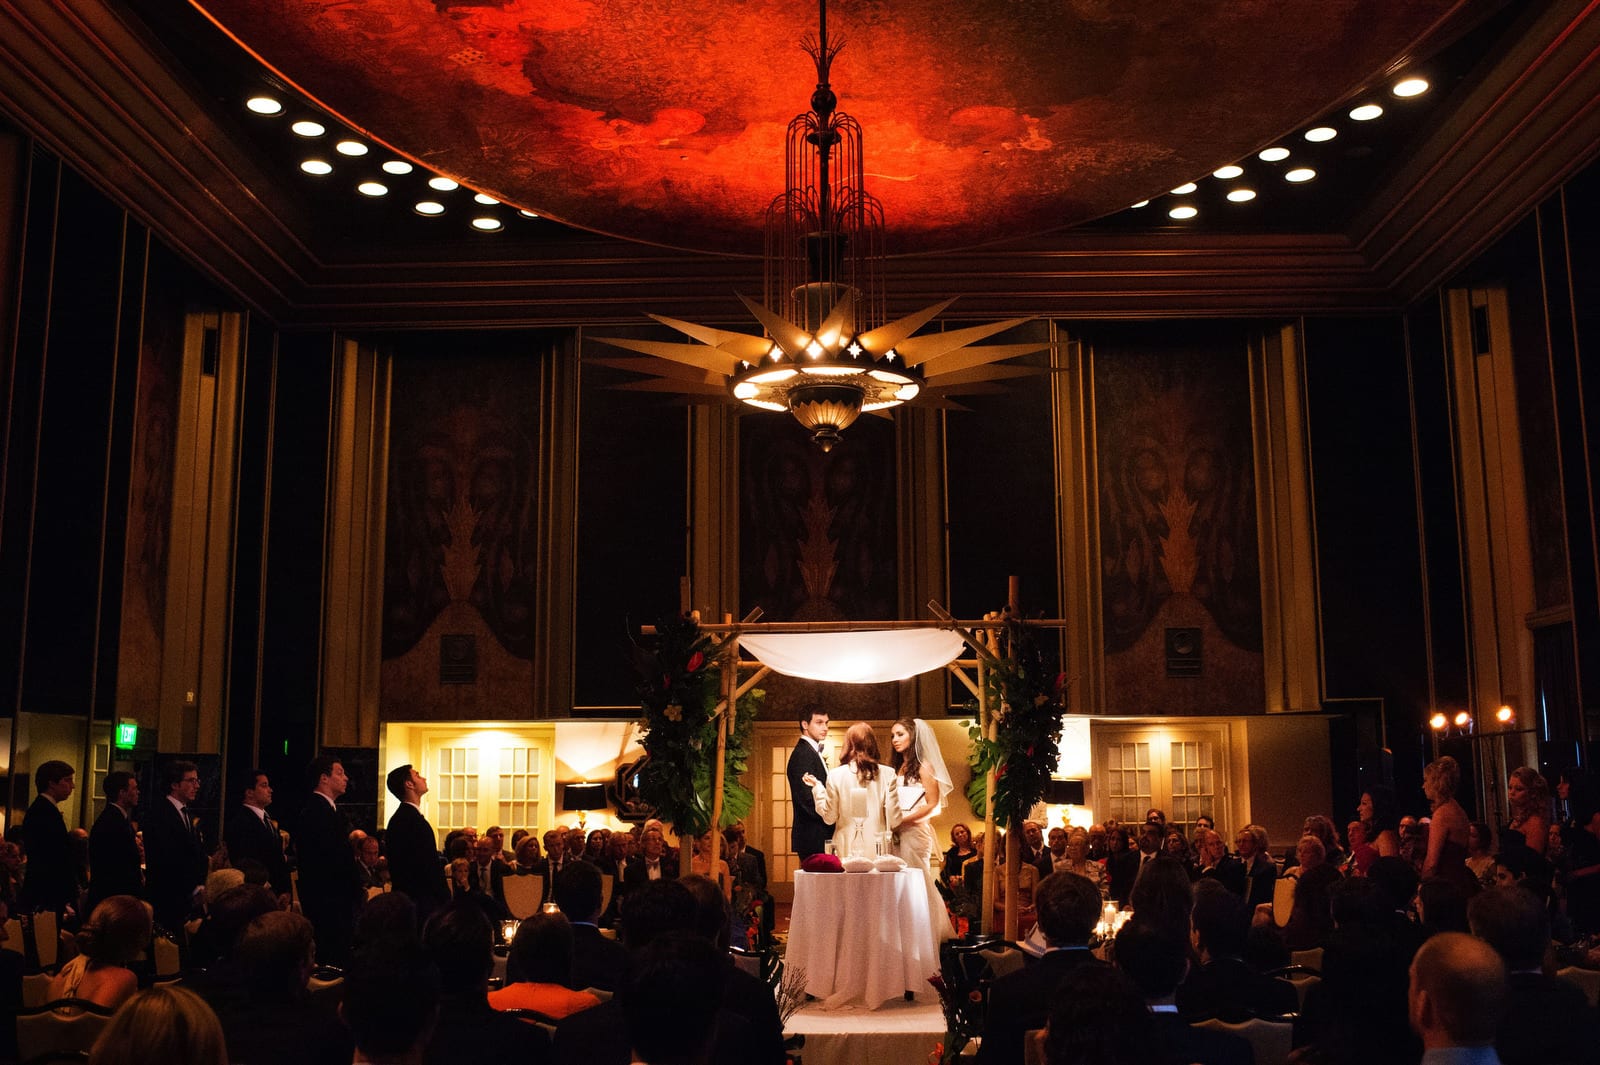 A bride and groom stand beneath a lighted chuppah in the art deco Urban Room at the Omni William Penn Hotel.